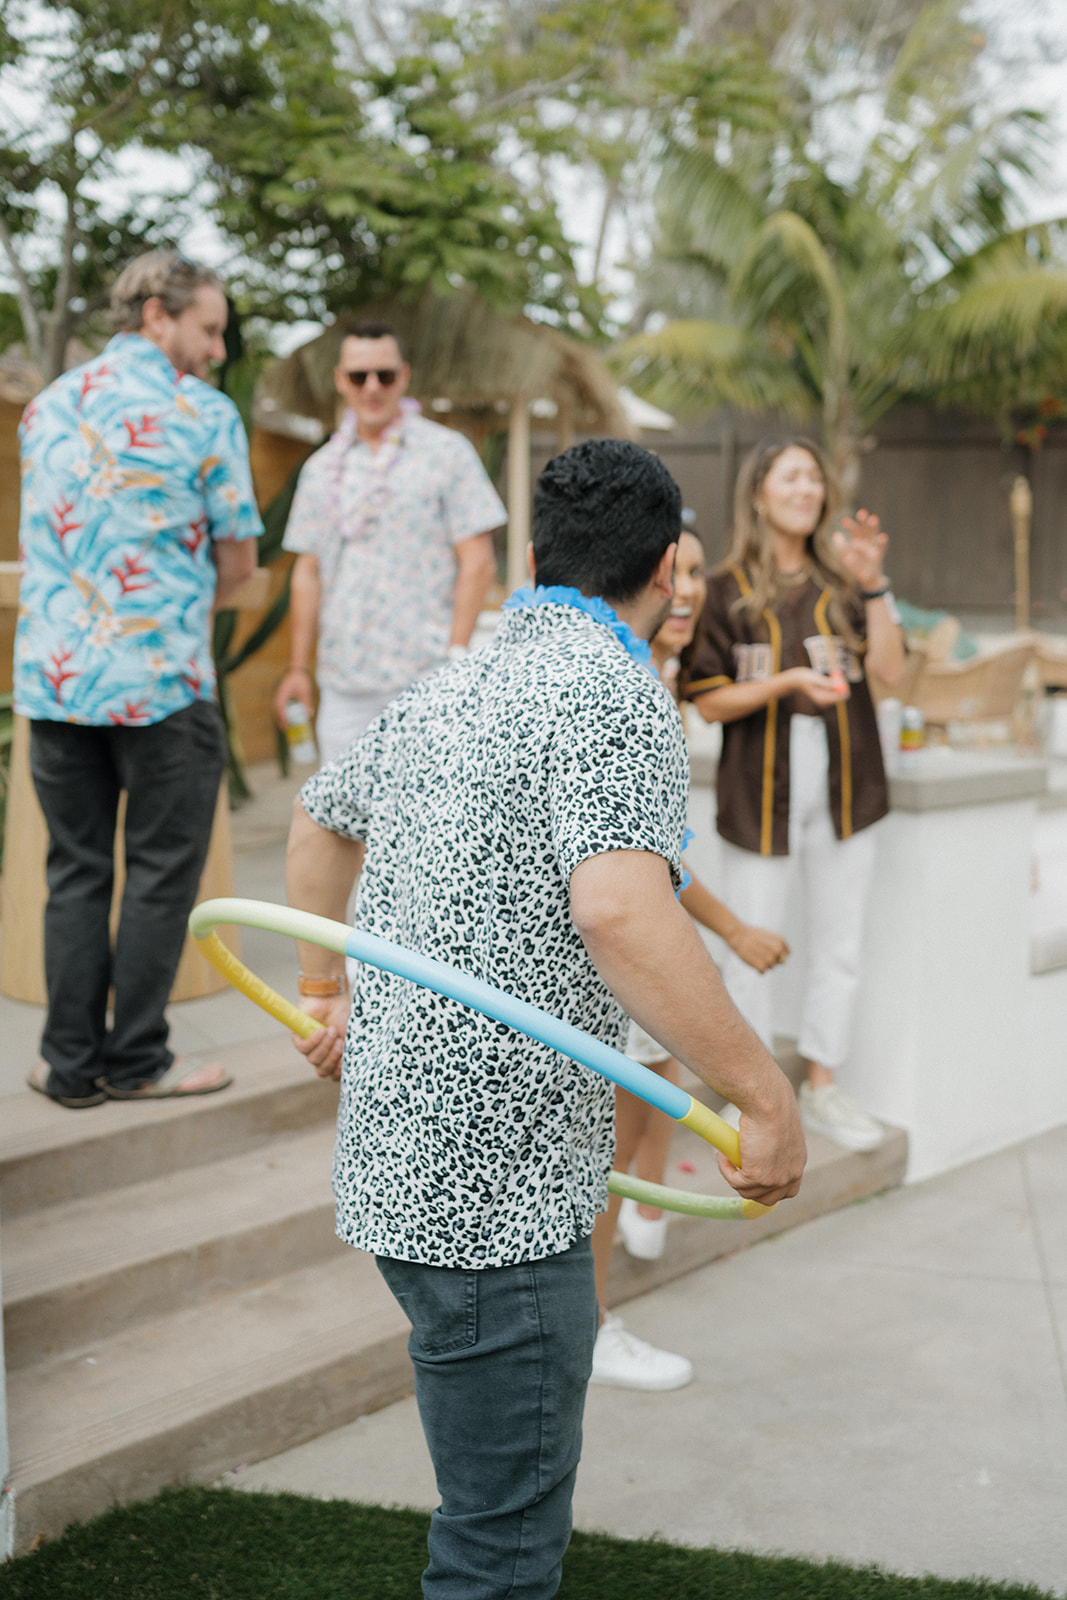 Aloha tropical themed first birthday party with hula hoops